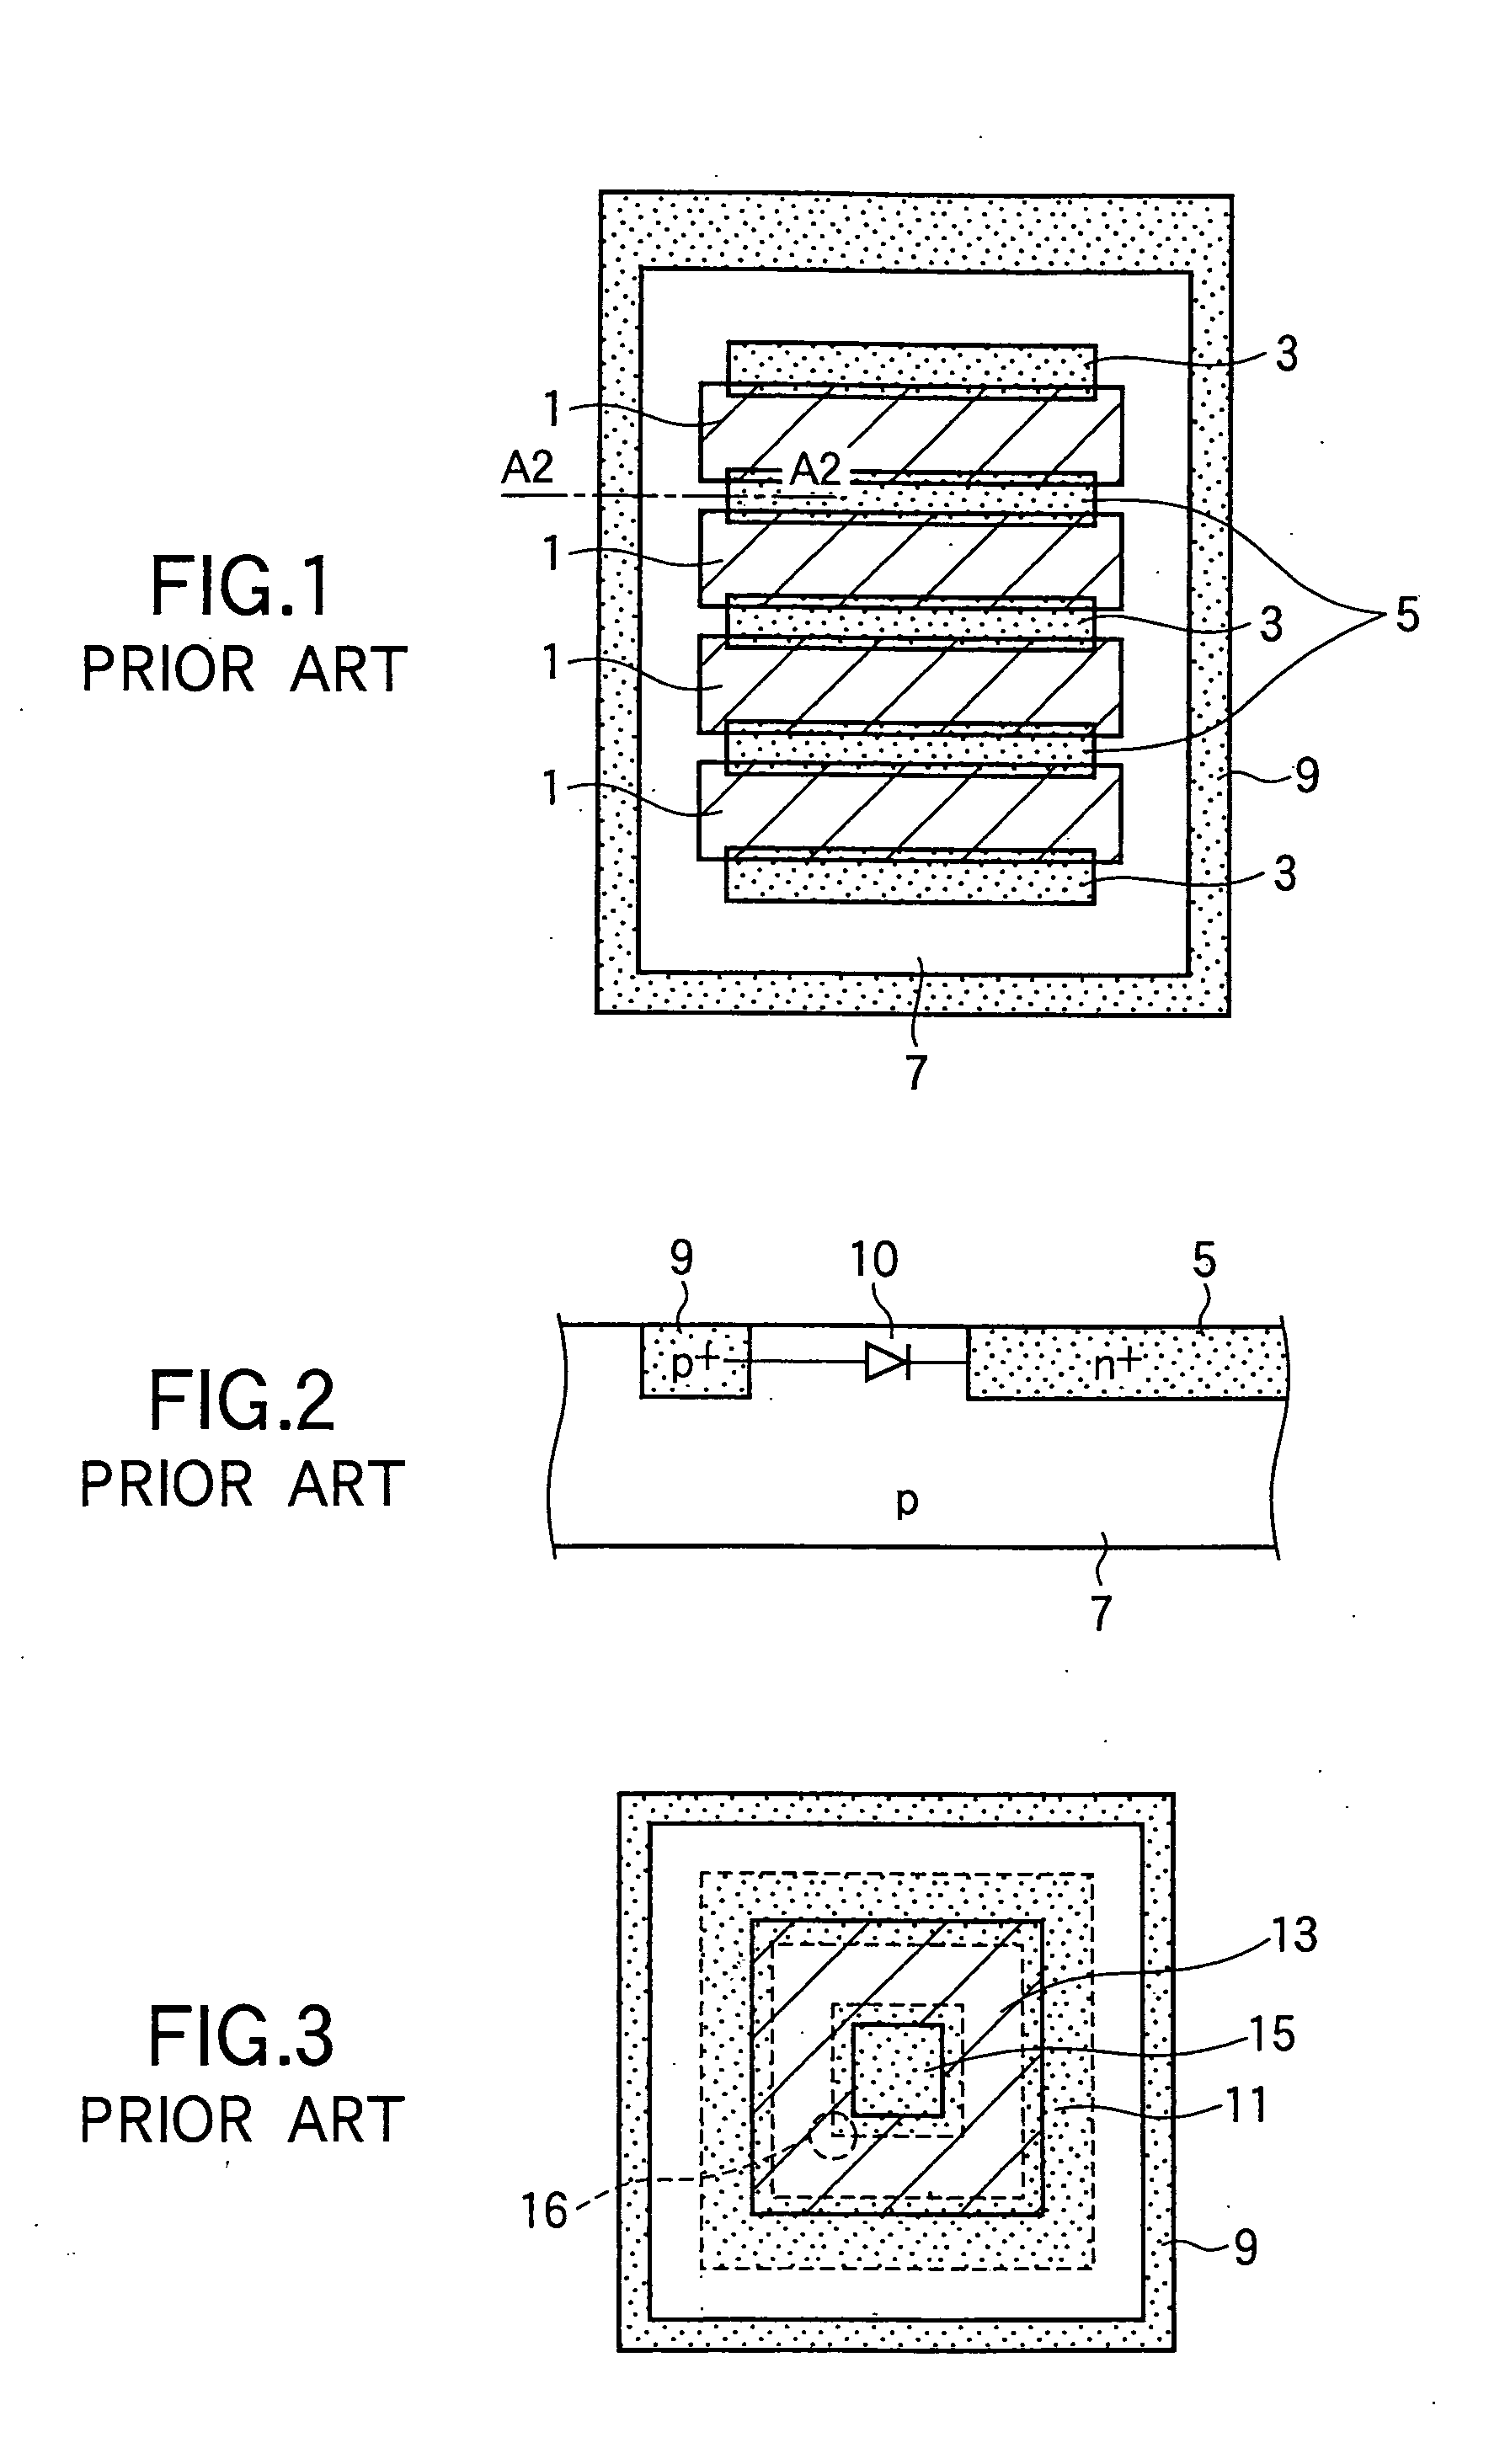 Semiconductor device with improved protection from electrostatic discharge